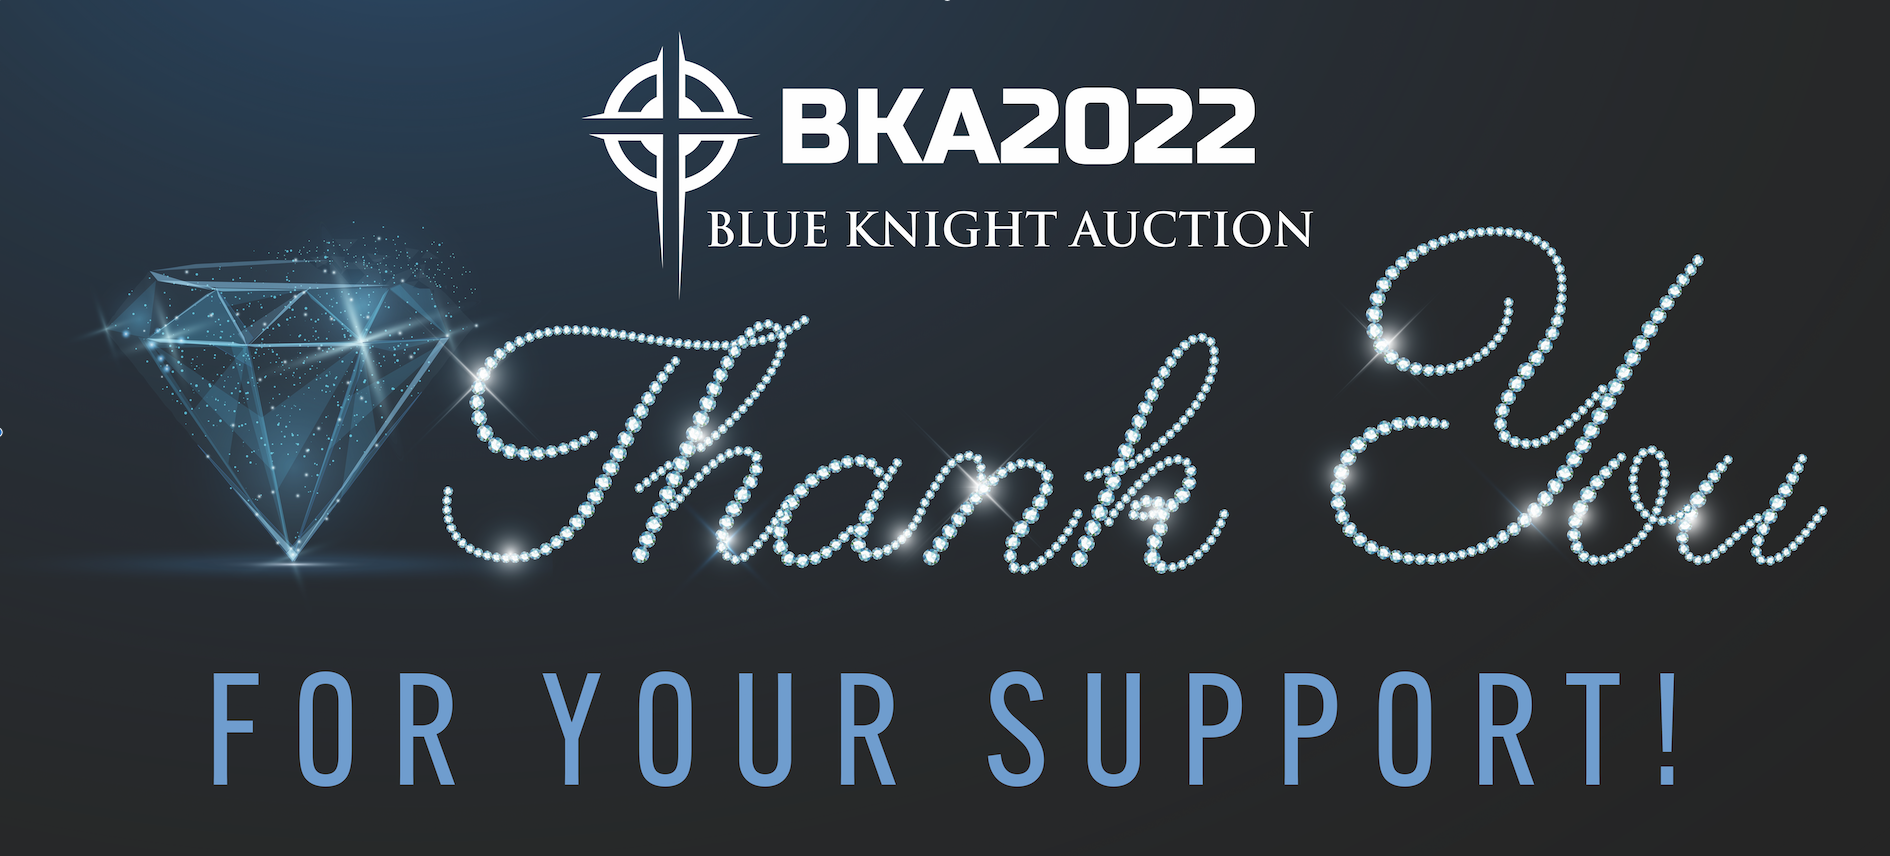 Blue Knight Auction Thank You!